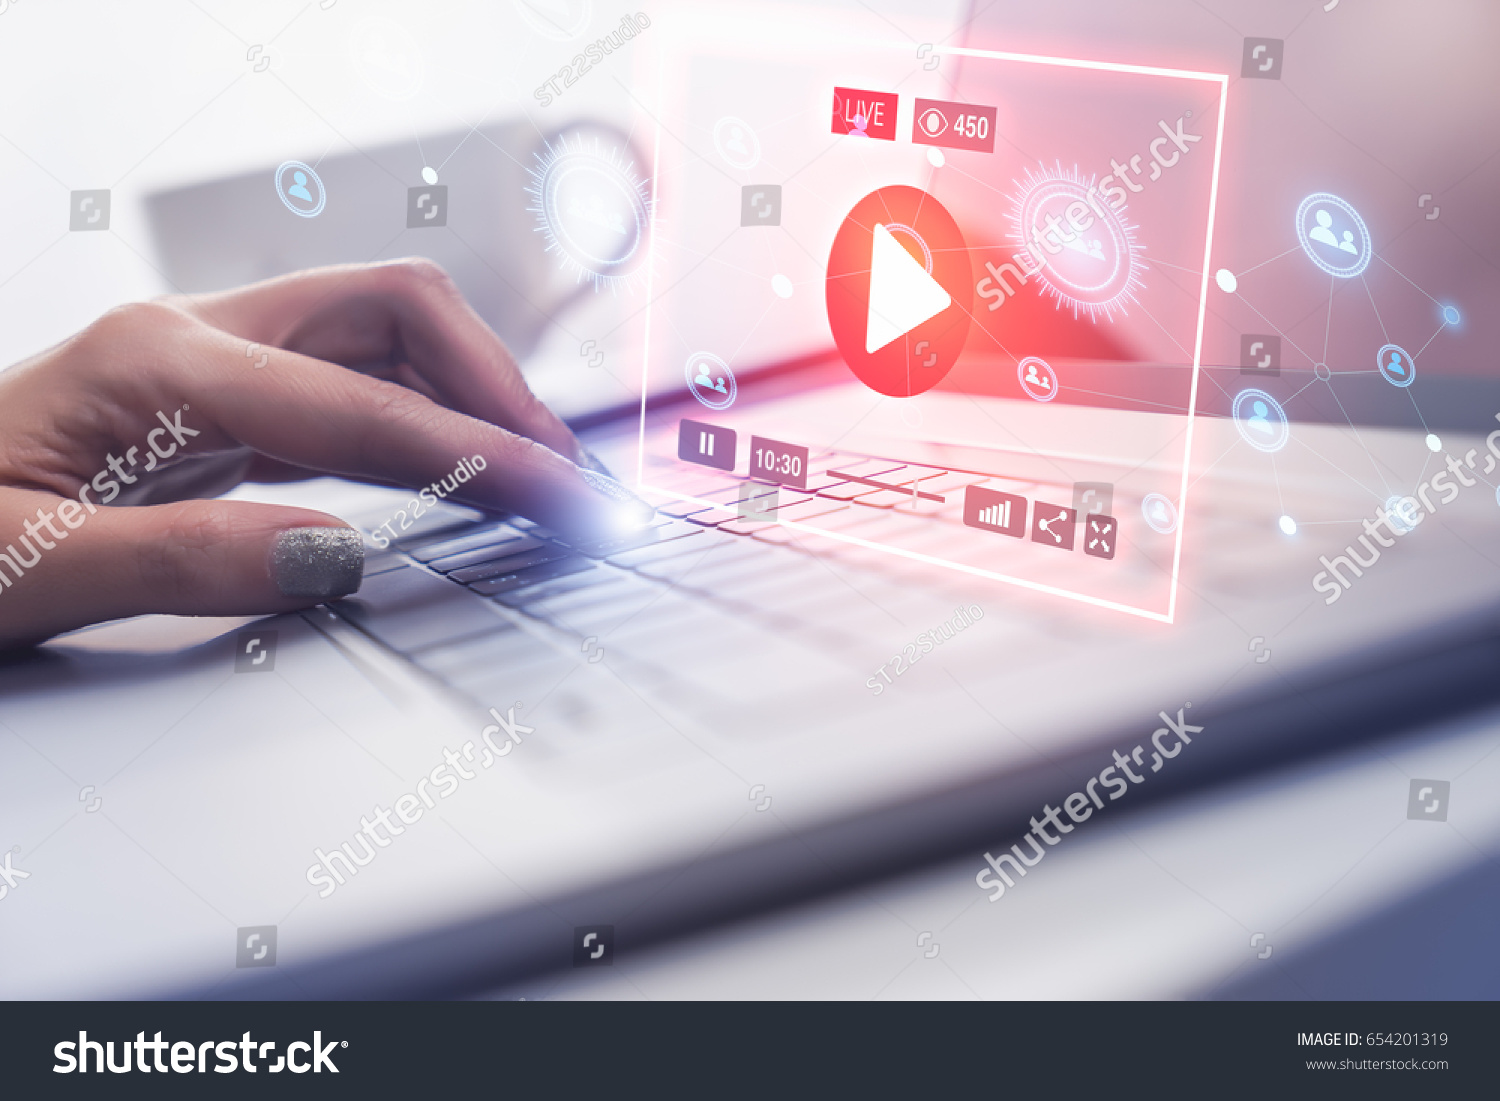 Woman hand using modern laptop computer to connect with live streaming video on social network